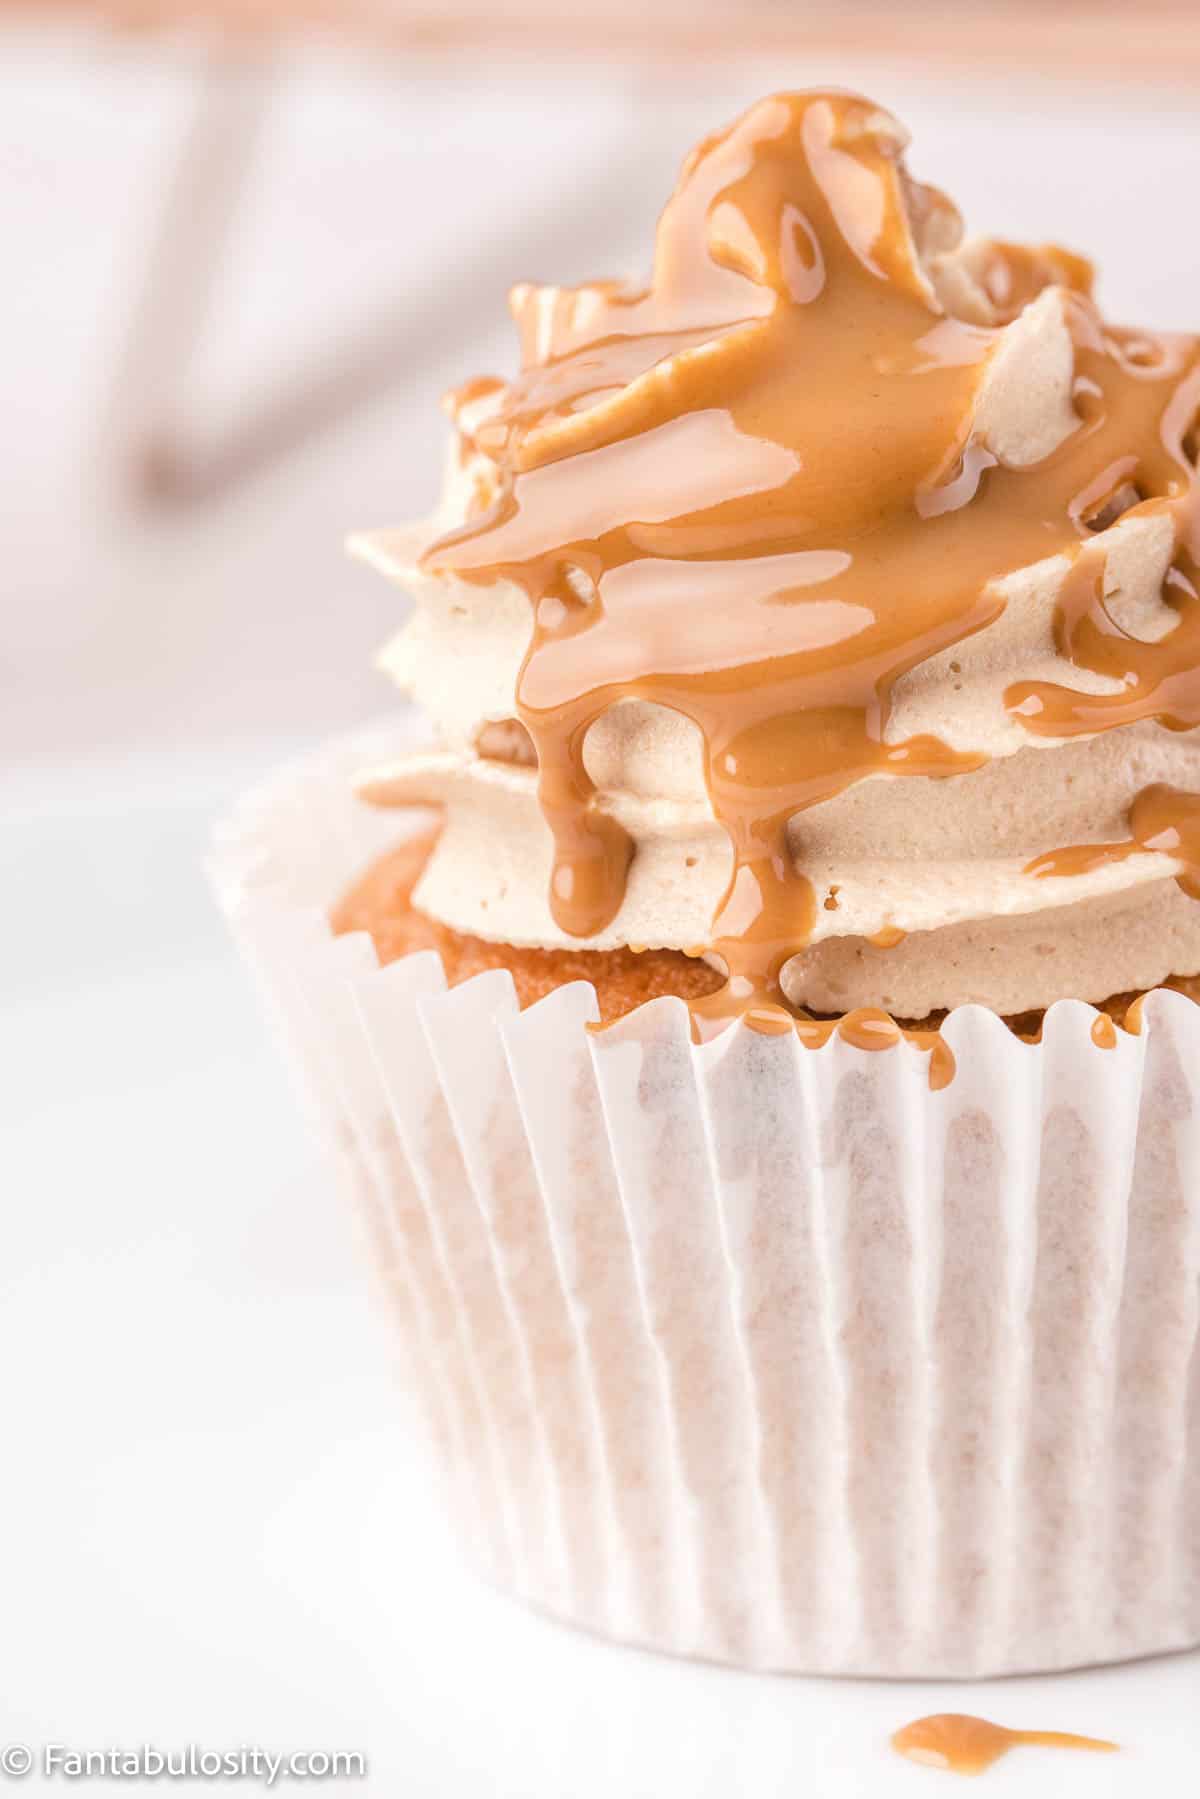 A close up photo of a buttercream frosted cupcake that has been drizzled with melted cookie butter